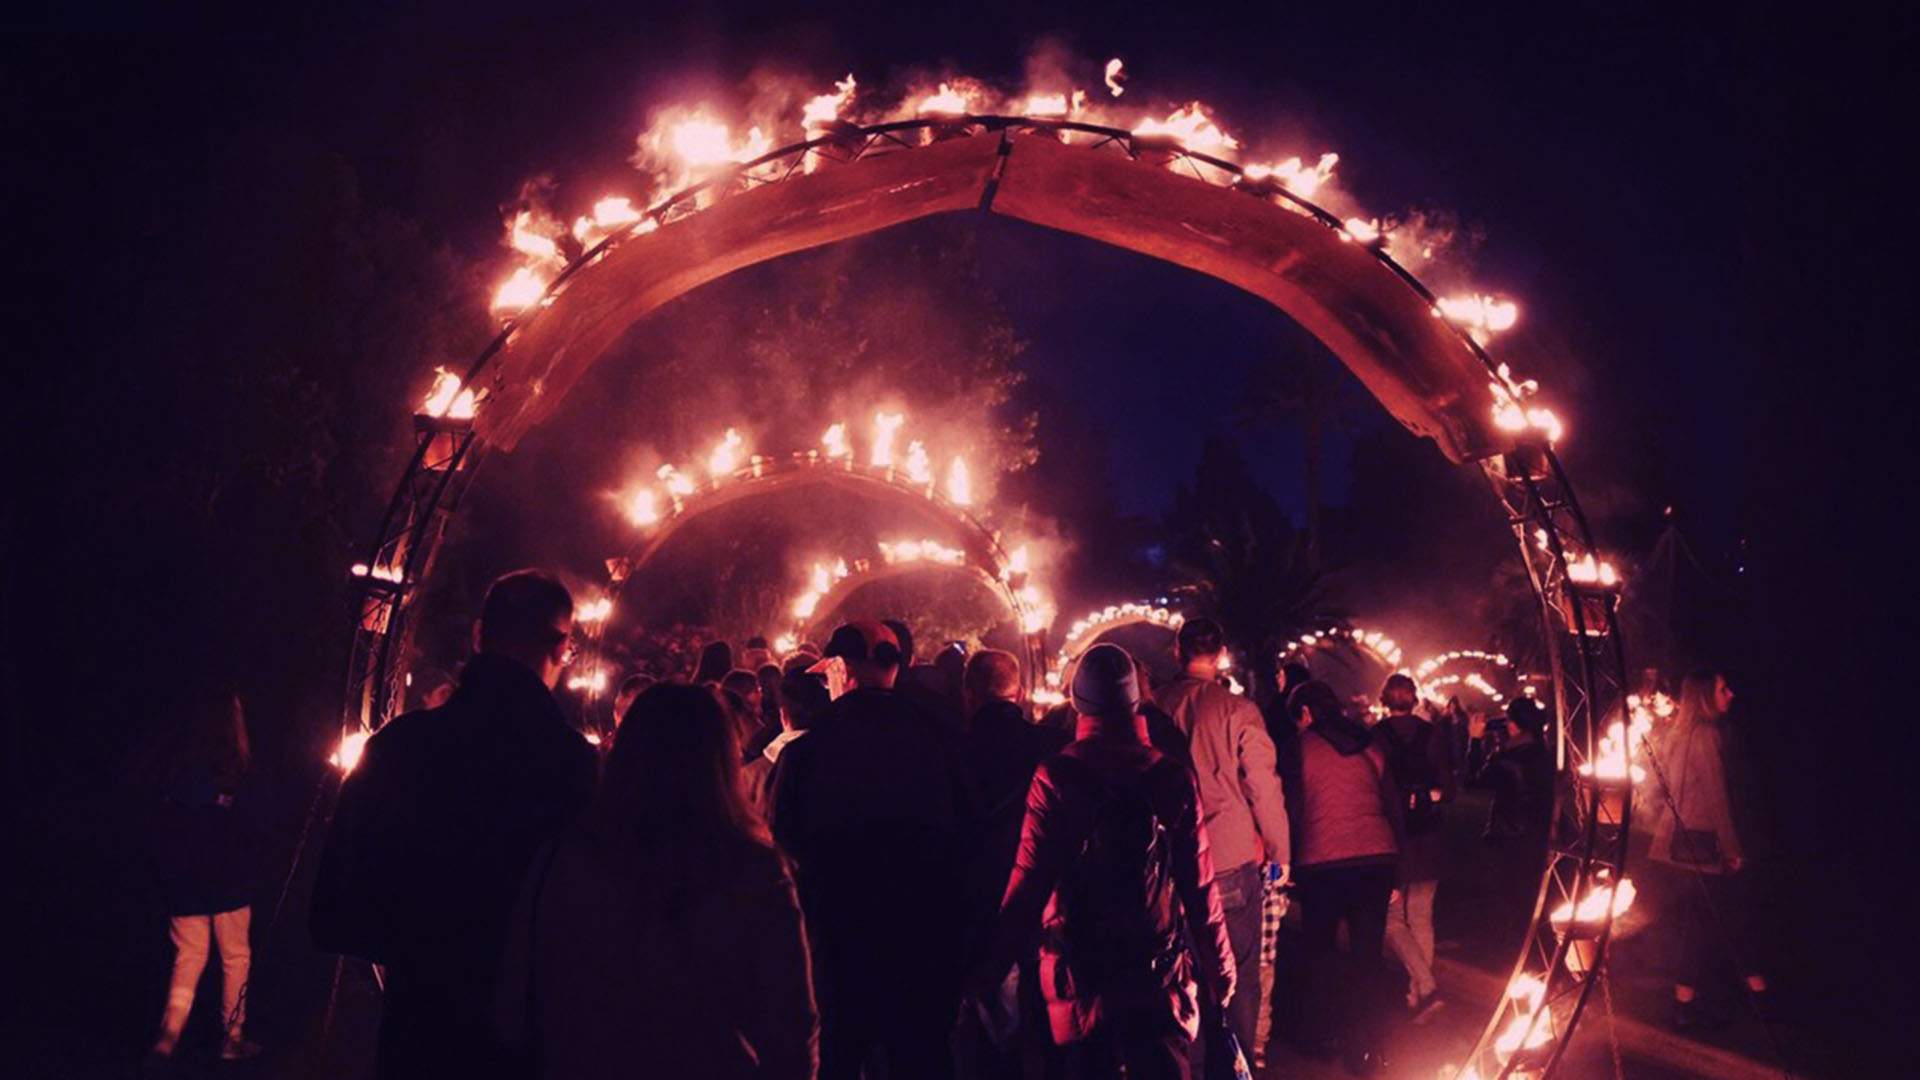 Brisbane's 'Fire Gardens' Installation Will Not Be Going Ahead This Week